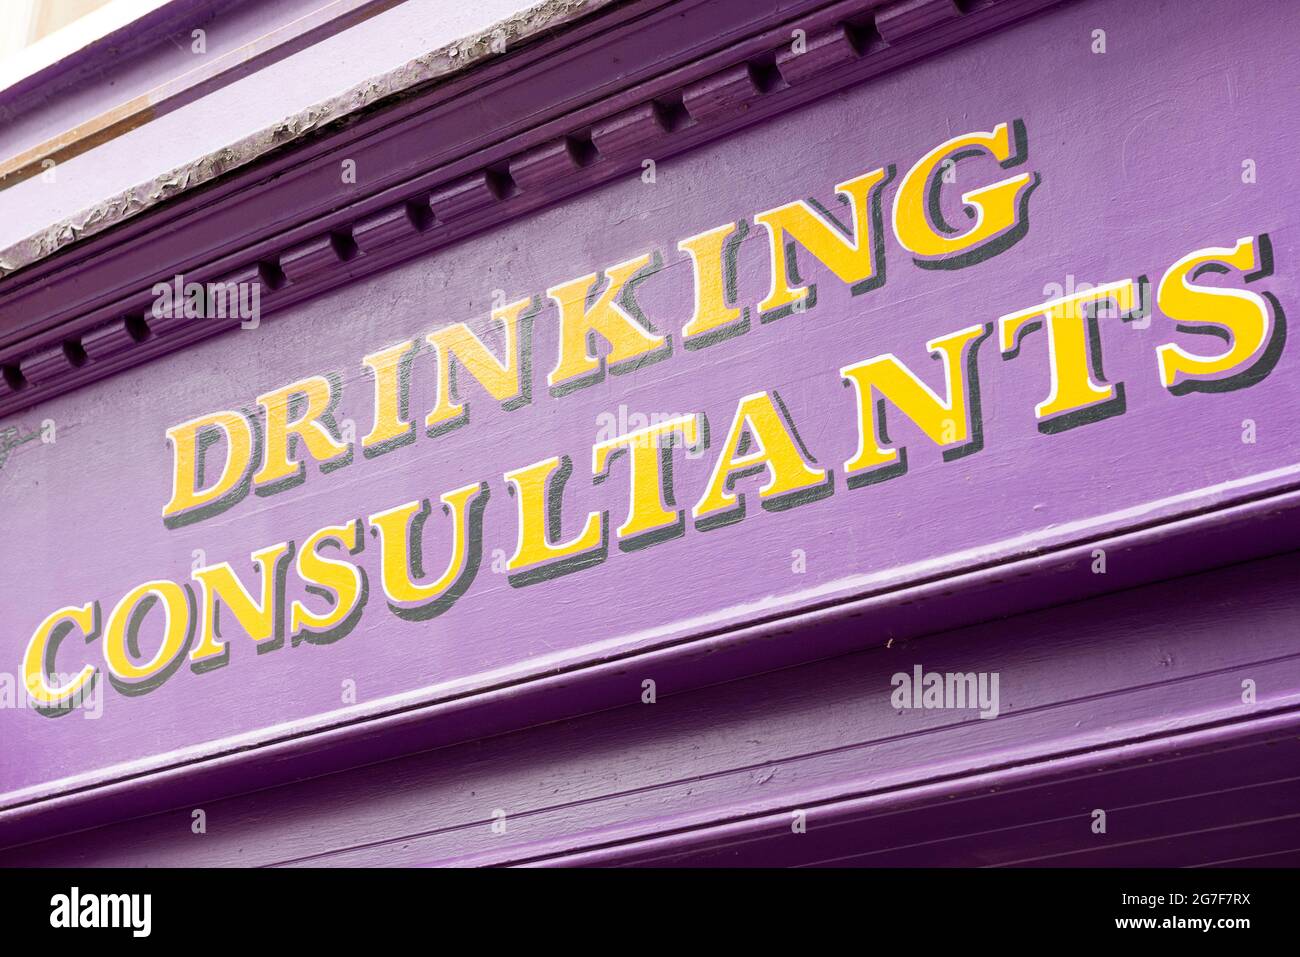 Drinking Consultants writing on colourful Irish bar facade in Tralee, County Kerry, Ireland Stock Photo